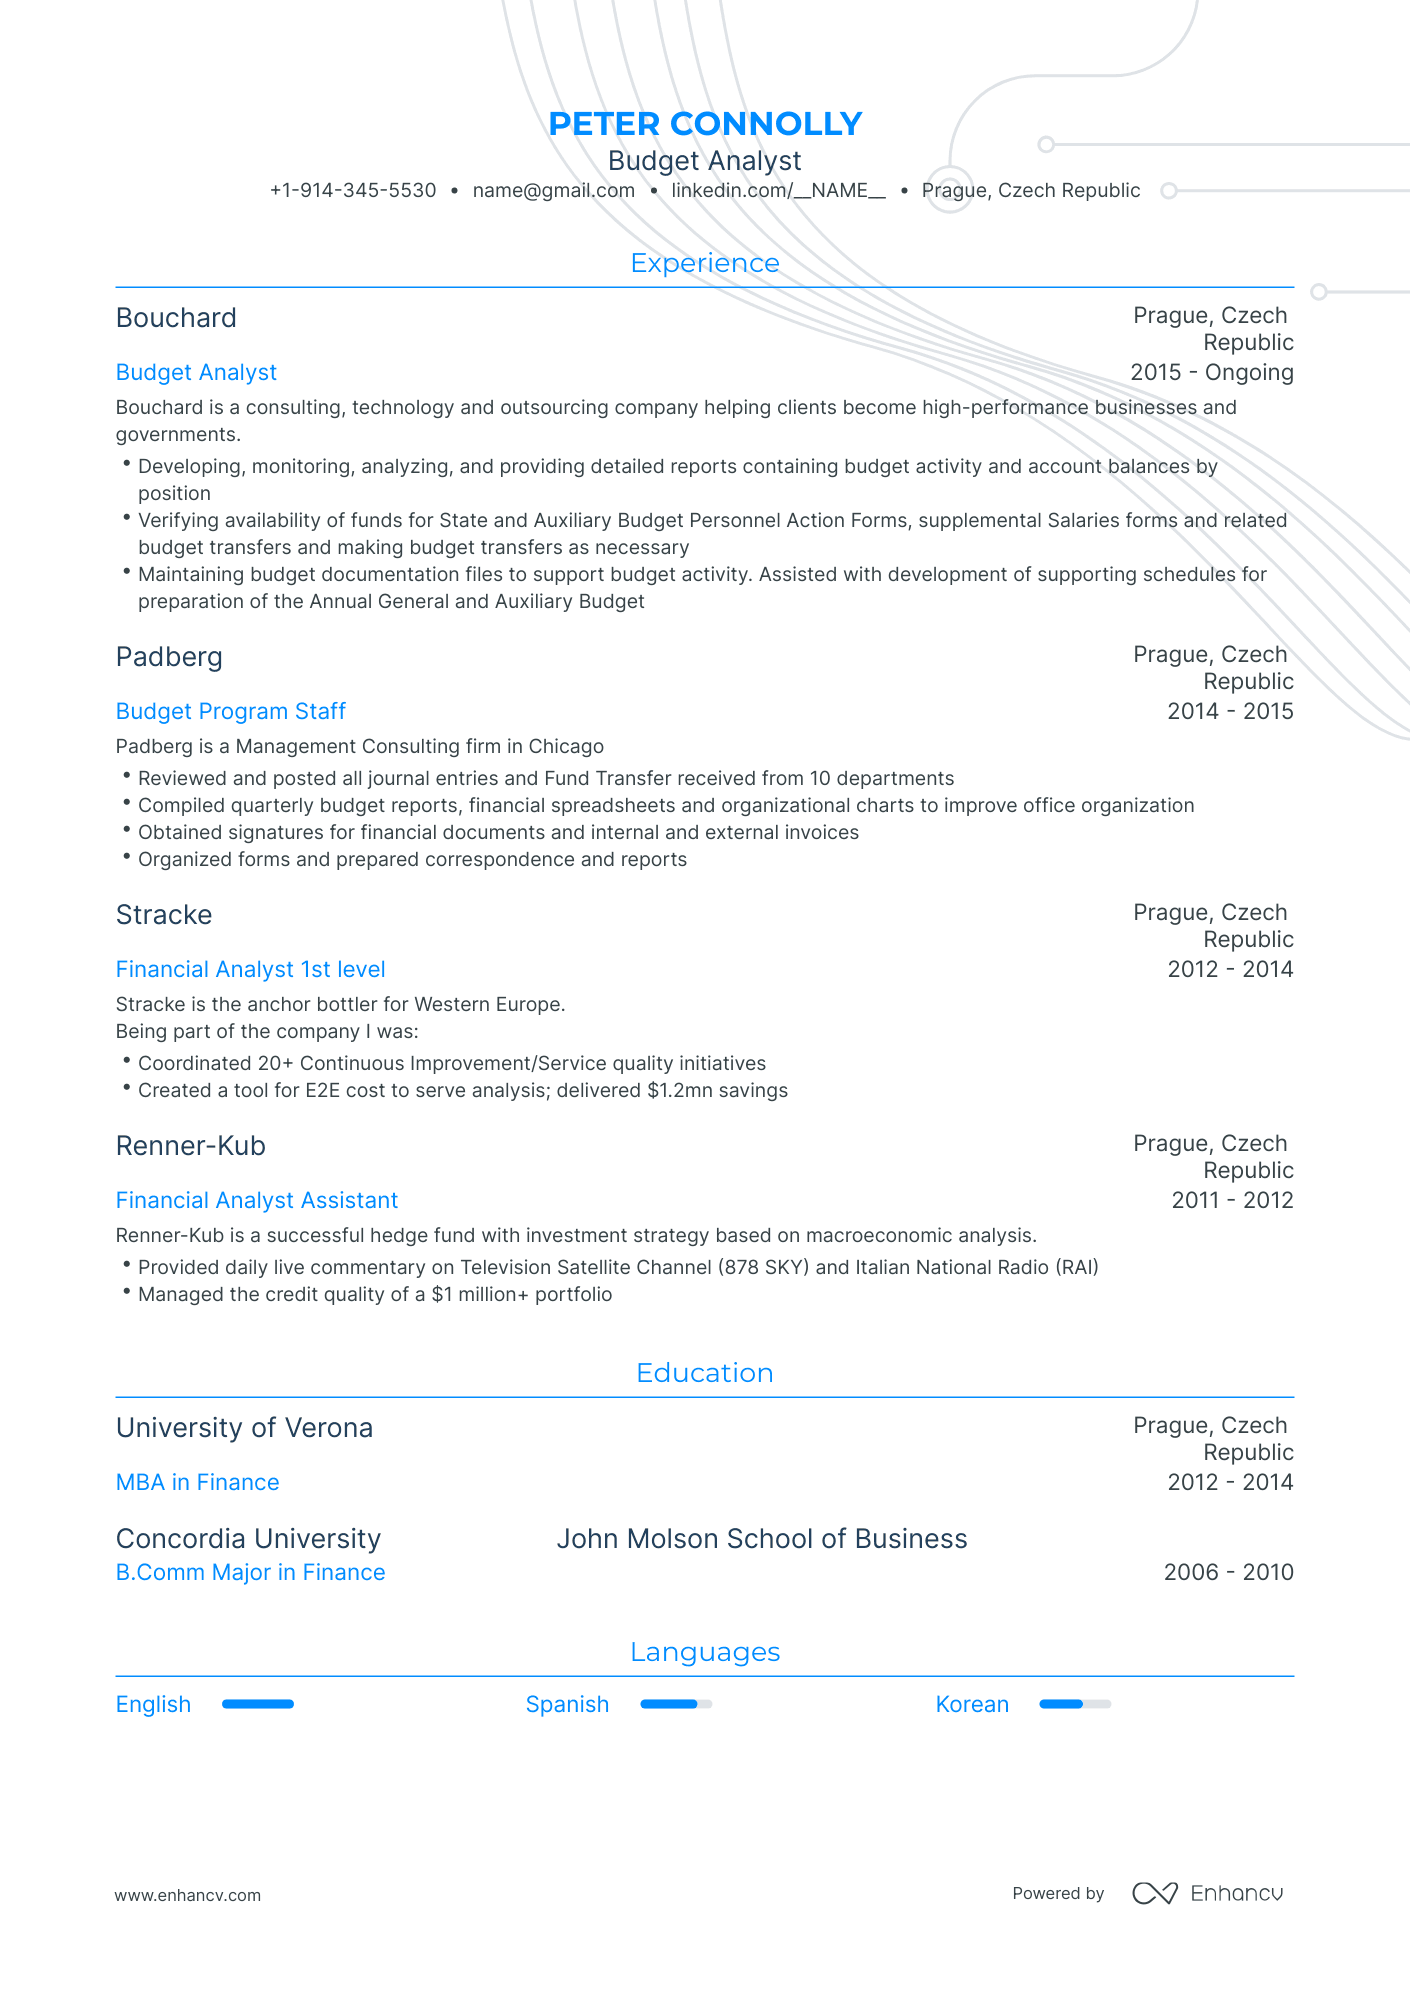 Traditional Budget Analyst Resume Template